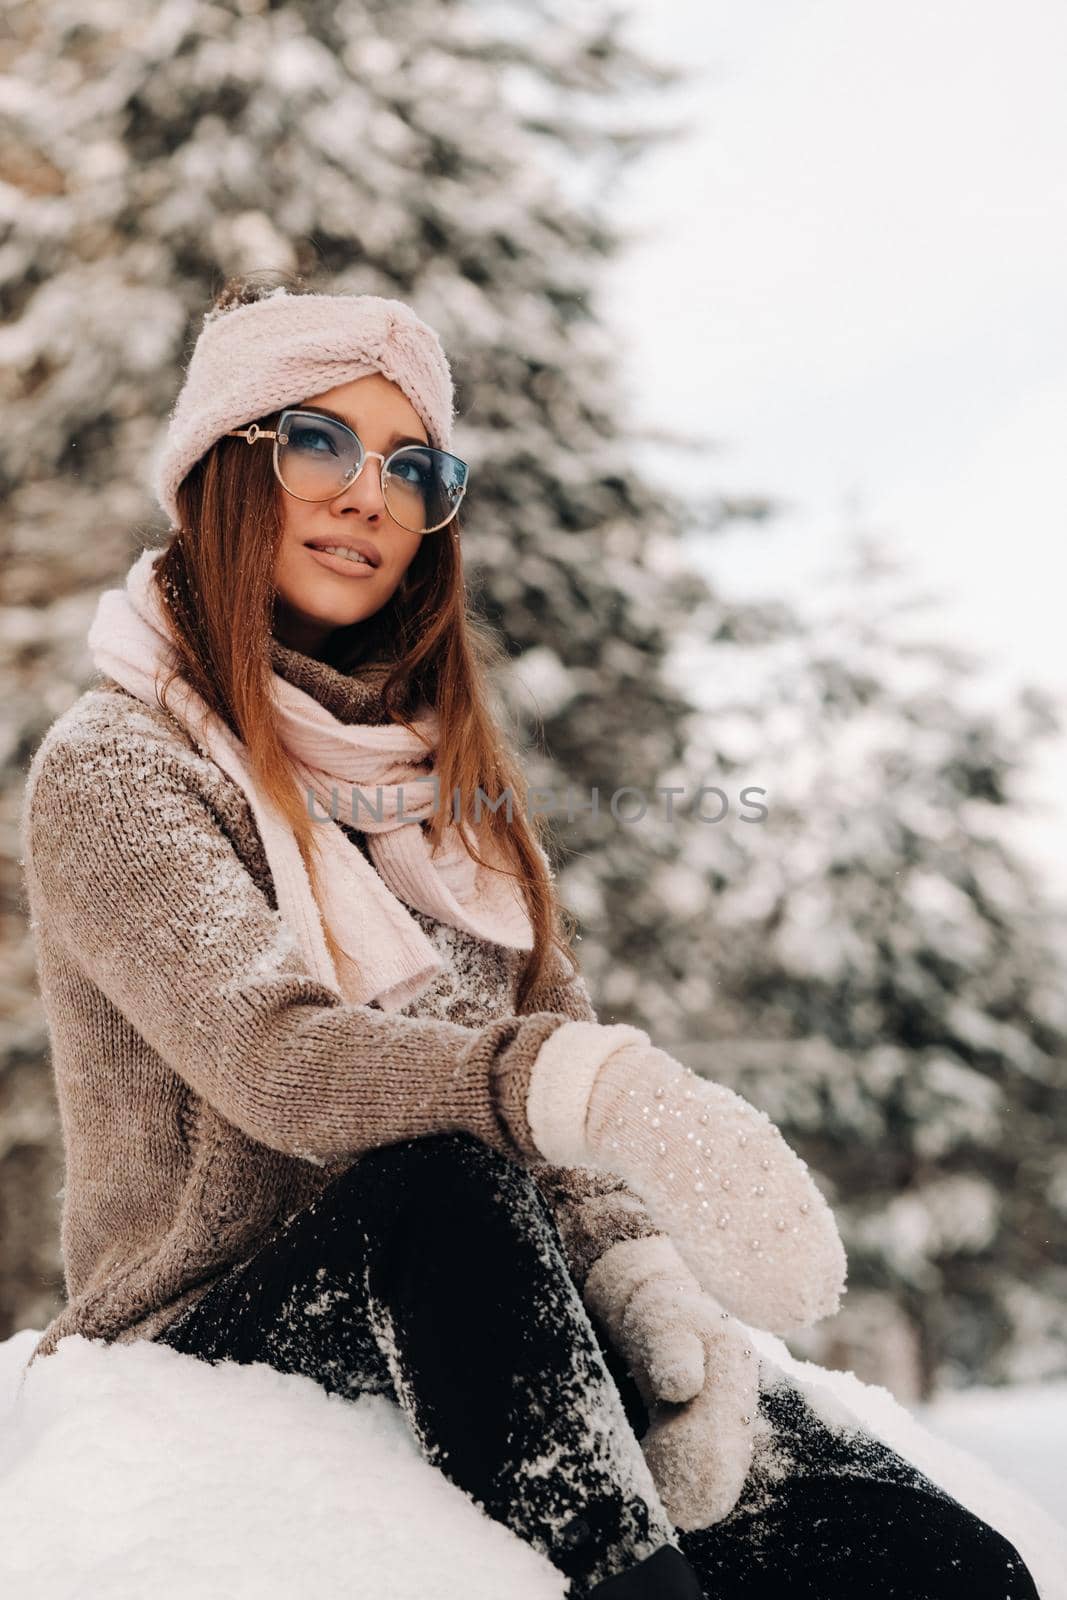 A girl in a sweater and glasses in winter sits on a snow-covered background in the forest by Lobachad